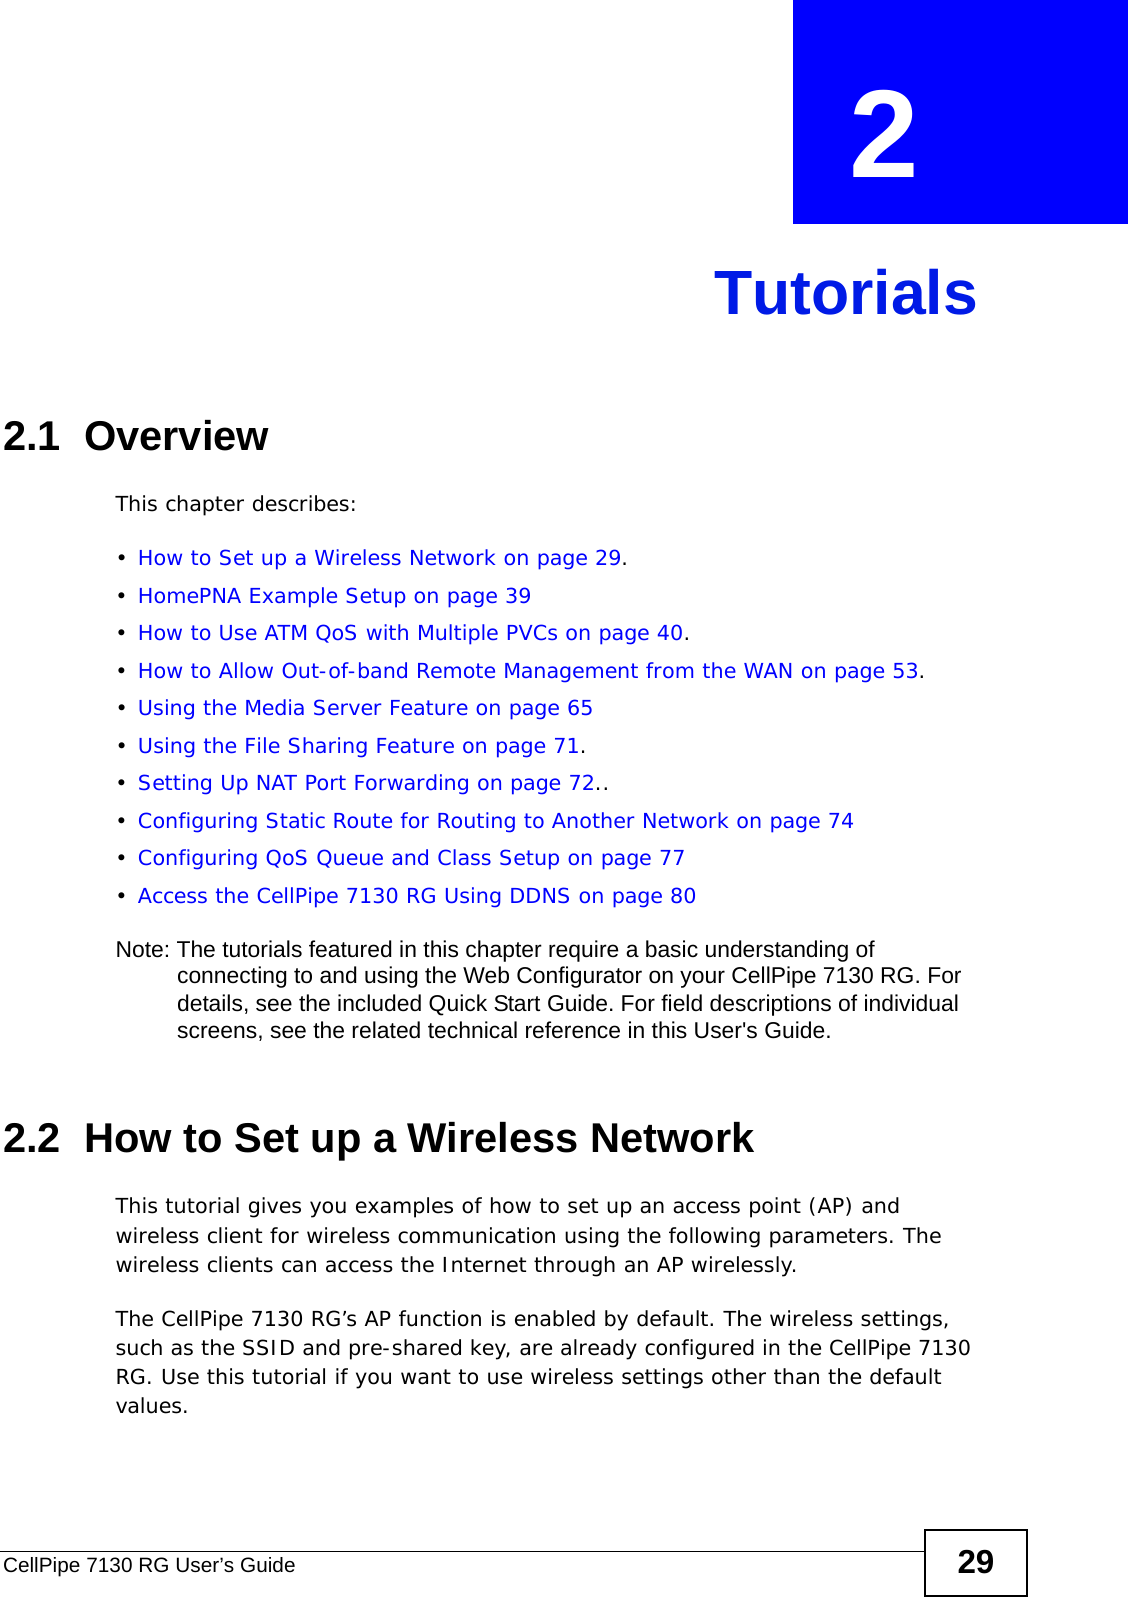 CellPipe 7130 RG User’s Guide 29CHAPTER  2 Tutorials2.1  OverviewThis chapter describes:•How to Set up a Wireless Network on page 29.•HomePNA Example Setup on page 39•How to Use ATM QoS with Multiple PVCs on page 40.•How to Allow Out-of-band Remote Management from the WAN on page 53.•Using the Media Server Feature on page 65•Using the File Sharing Feature on page 71.•Setting Up NAT Port Forwarding on page 72..•Configuring Static Route for Routing to Another Network on page 74•Configuring QoS Queue and Class Setup on page 77•Access the CellPipe 7130 RG Using DDNS on page 80Note: The tutorials featured in this chapter require a basic understanding of connecting to and using the Web Configurator on your CellPipe 7130 RG. For details, see the included Quick Start Guide. For field descriptions of individual screens, see the related technical reference in this User&apos;s Guide.2.2  How to Set up a Wireless NetworkThis tutorial gives you examples of how to set up an access point (AP) and wireless client for wireless communication using the following parameters. The wireless clients can access the Internet through an AP wirelessly.The CellPipe 7130 RG’s AP function is enabled by default. The wireless settings, such as the SSID and pre-shared key, are already configured in the CellPipe 7130 RG. Use this tutorial if you want to use wireless settings other than the default values.